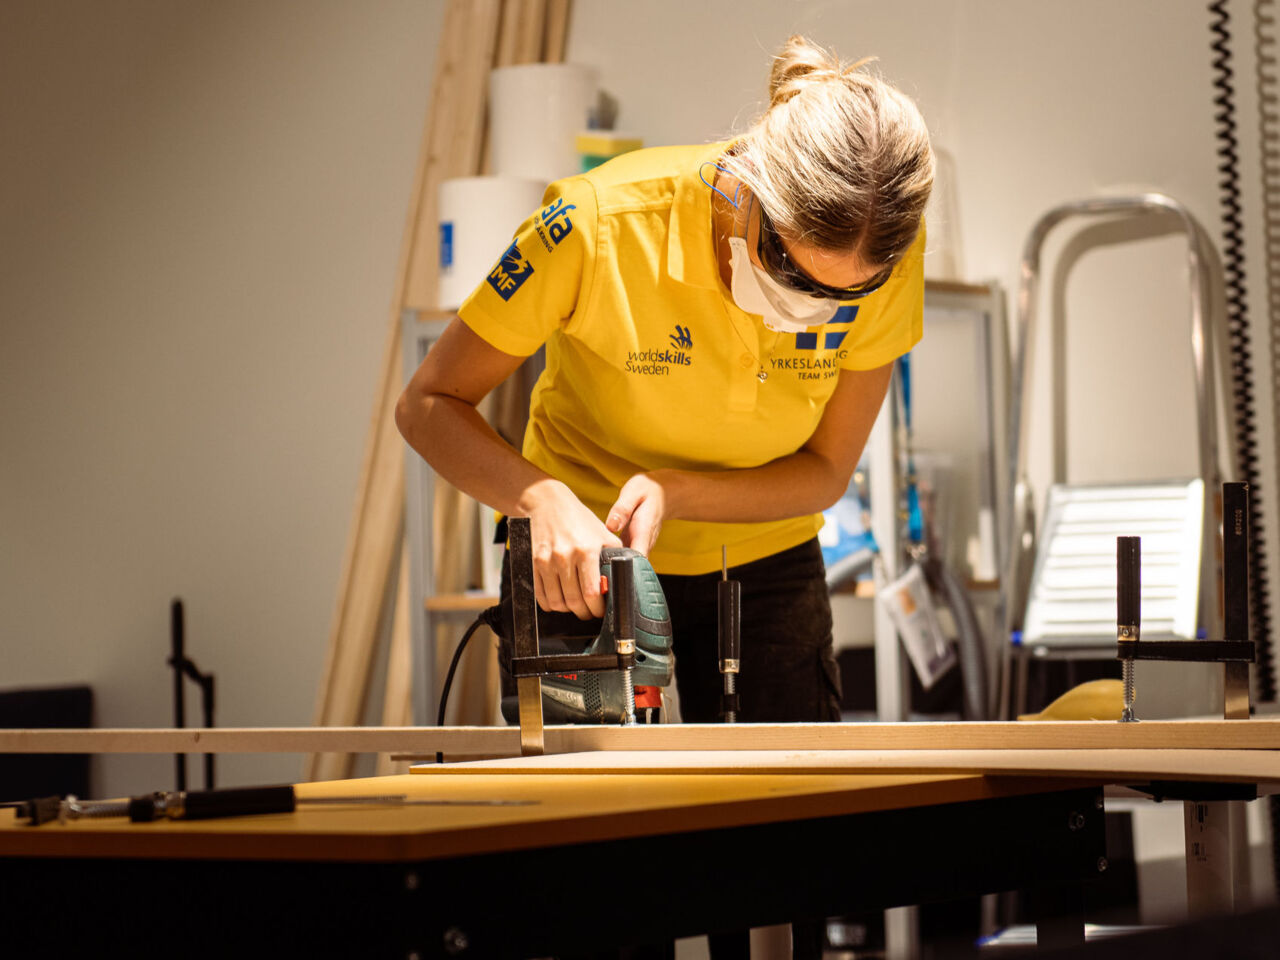 A competitor from Sweden cuts a board with a jigsaw as part of the Visual Merchandising competition which took place from 14 to 17 October 2022 in Stockholm, Sweden.
